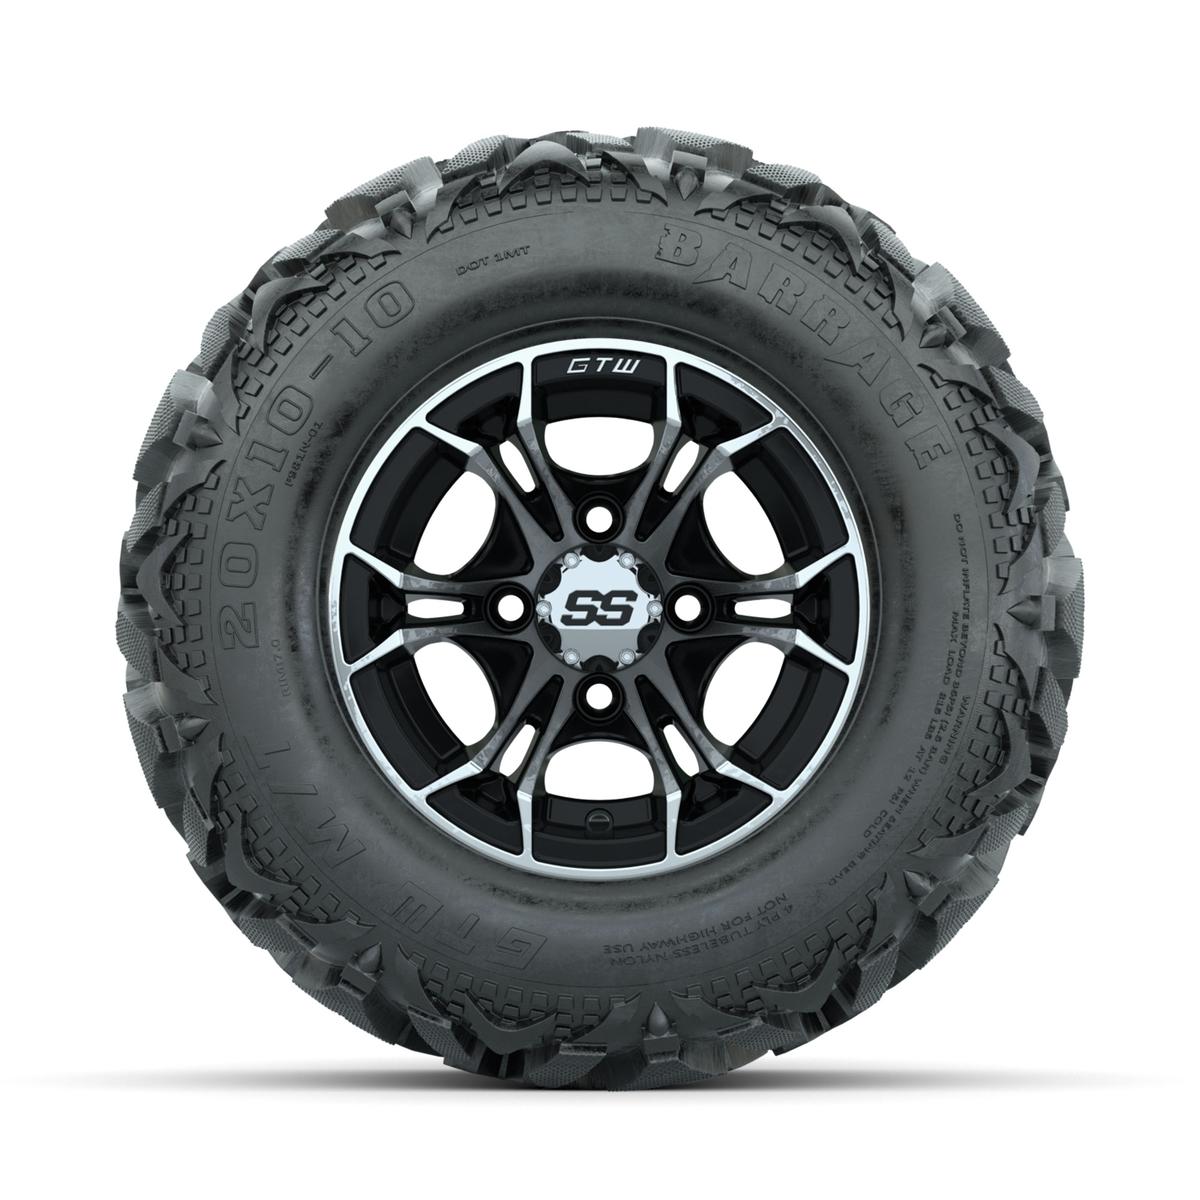 GTW Spyder Machined/Black 10 in Wheels with 20x10-10 Barrage Mud Tires – Full Set